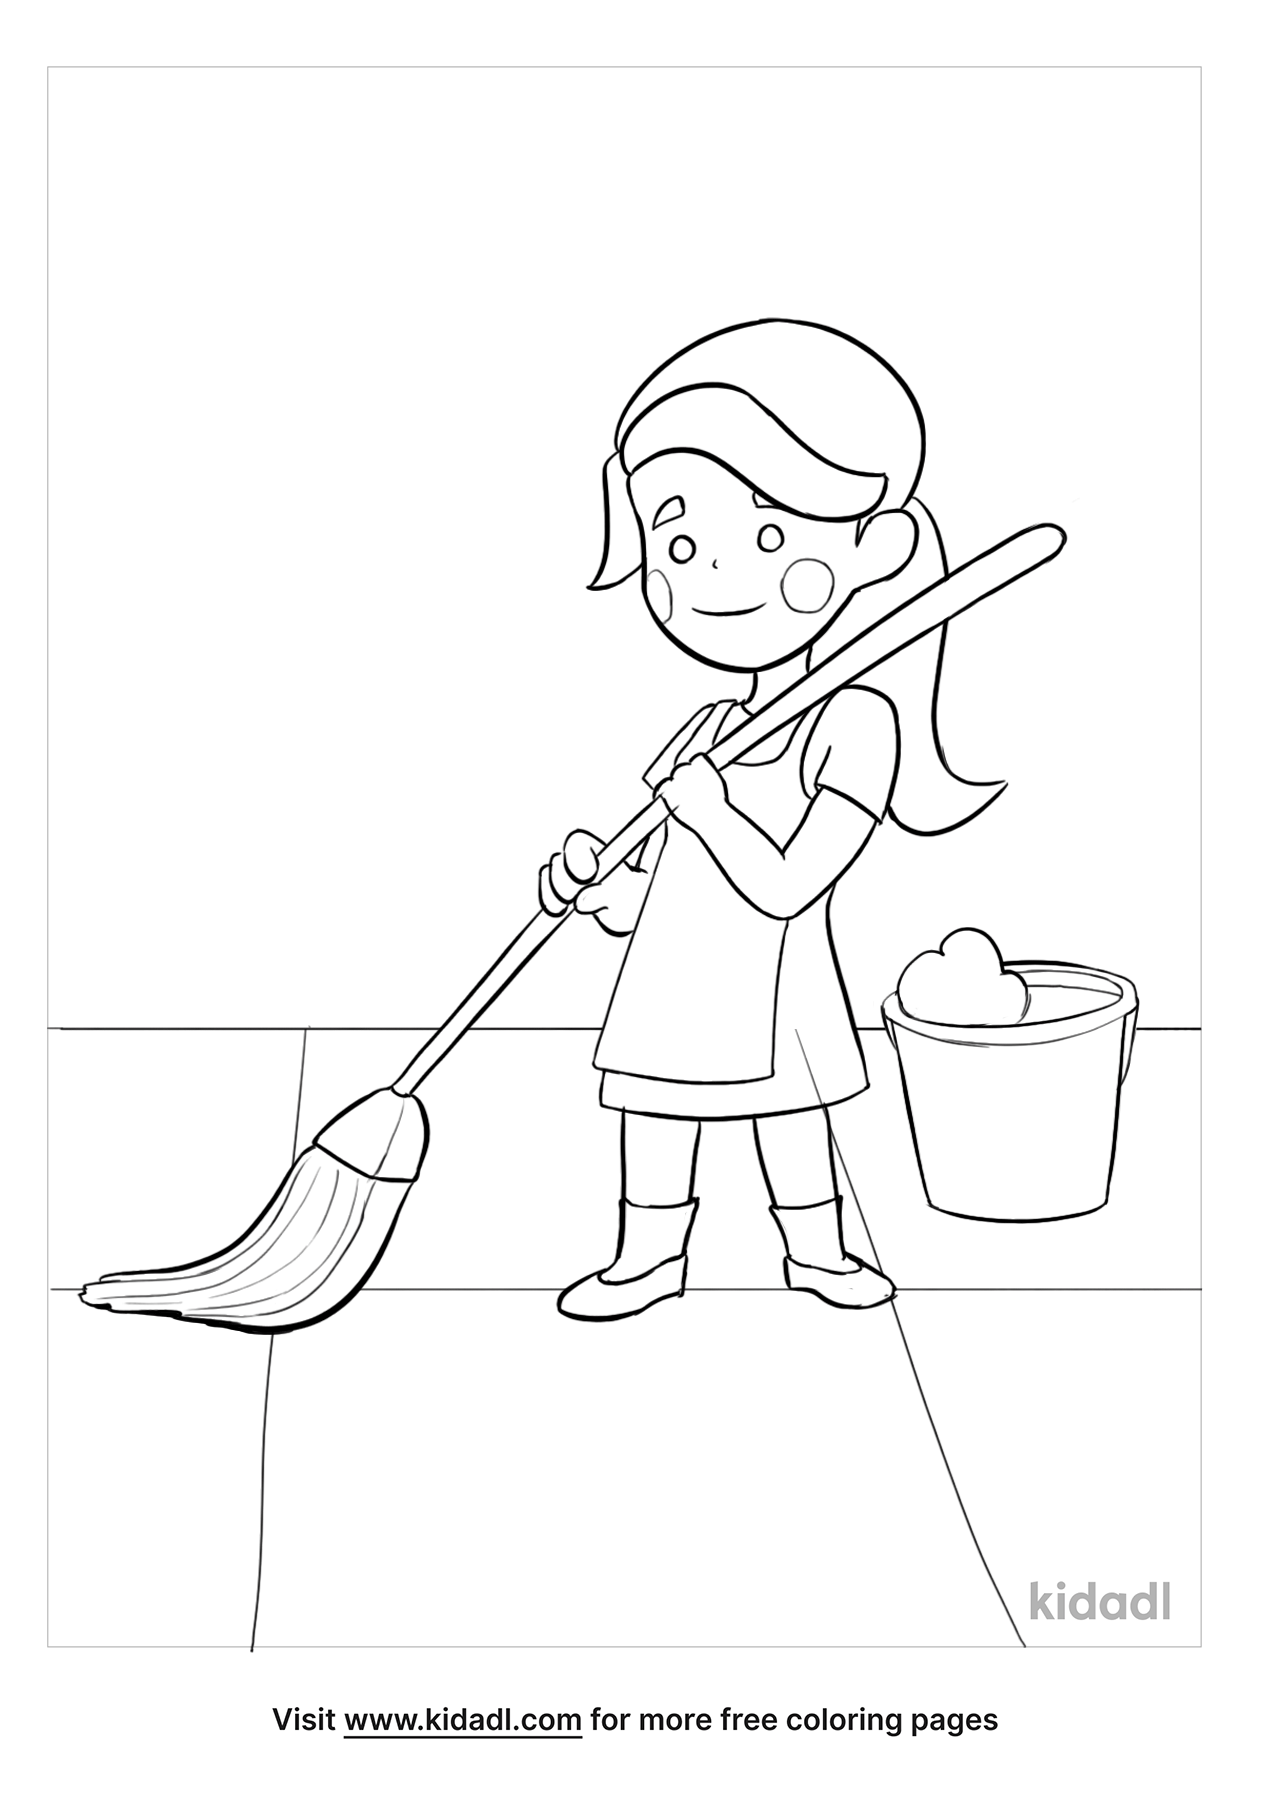 Clean Up Coloring Pages - Coloring Home